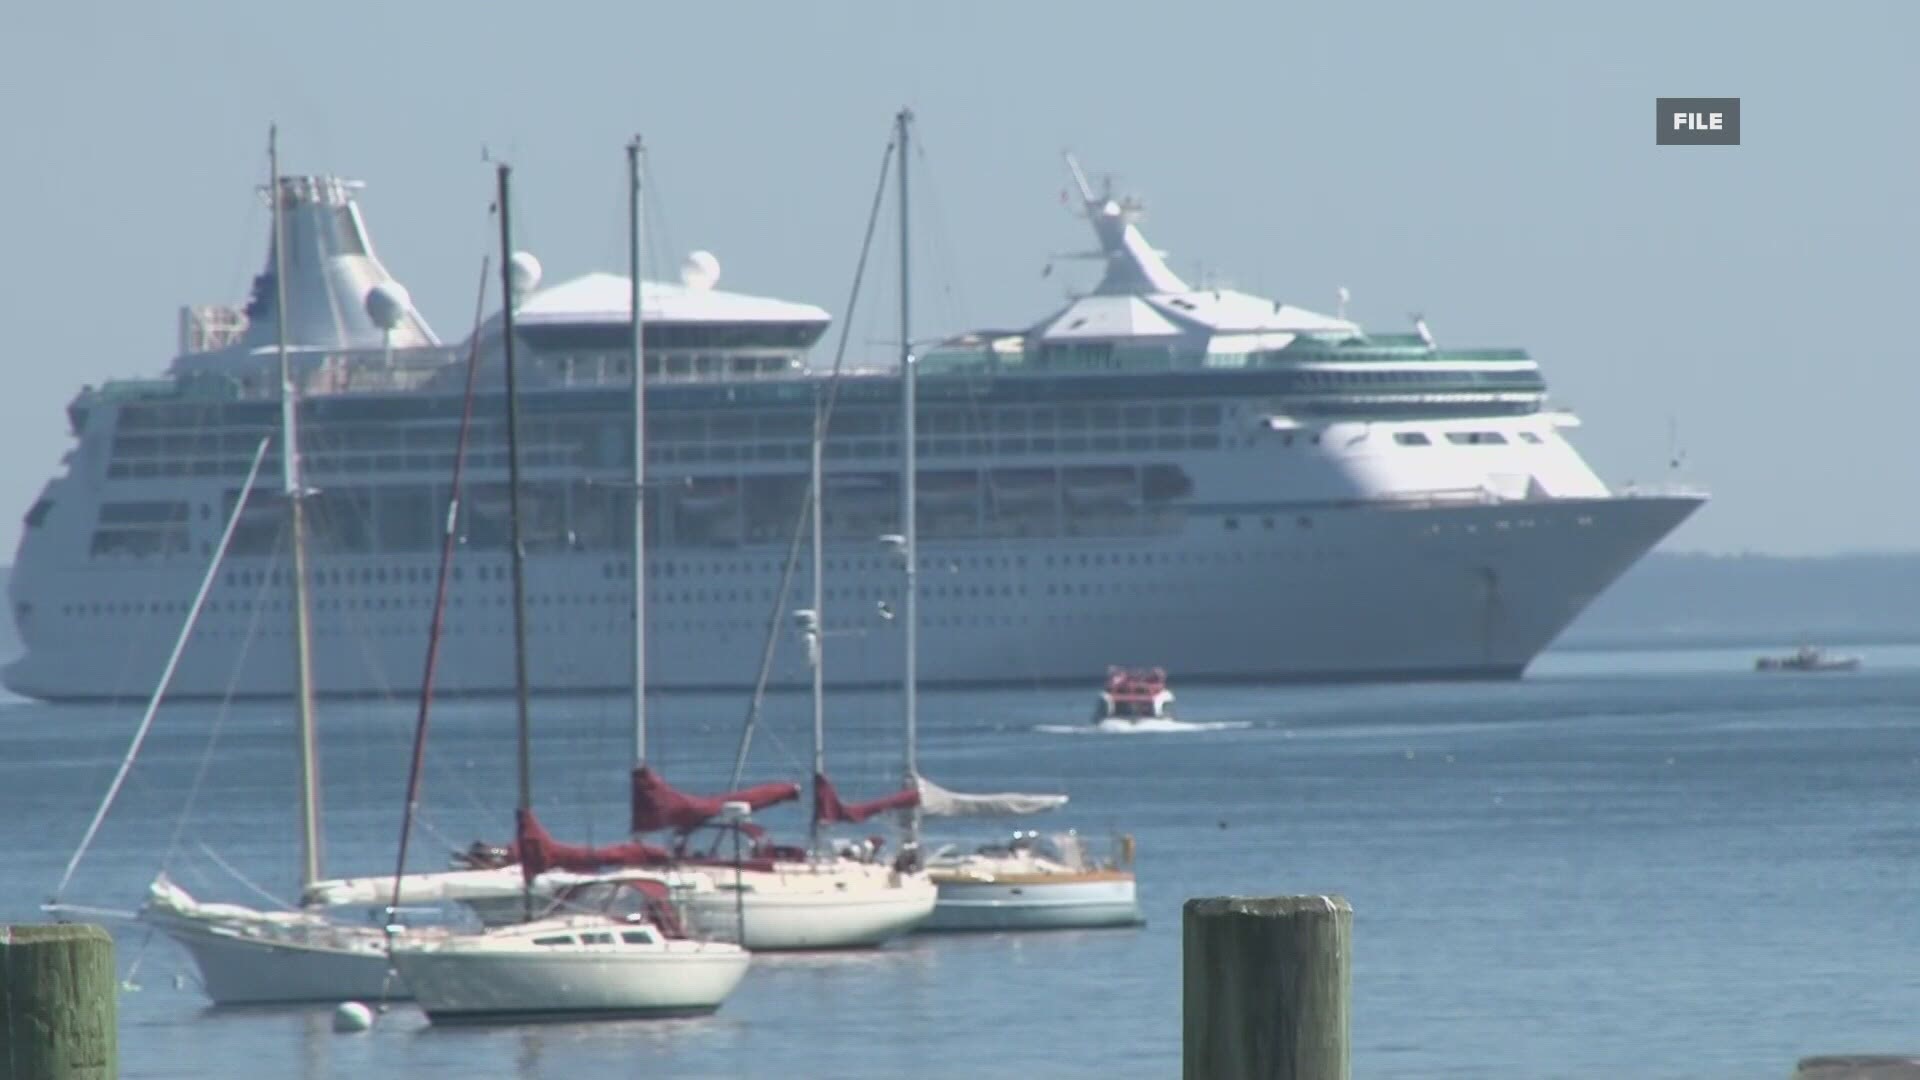 Bar harbor is not anticipating any cruise ships to make port this year.  But the town is looking to make some possible changes for when the ships do return.